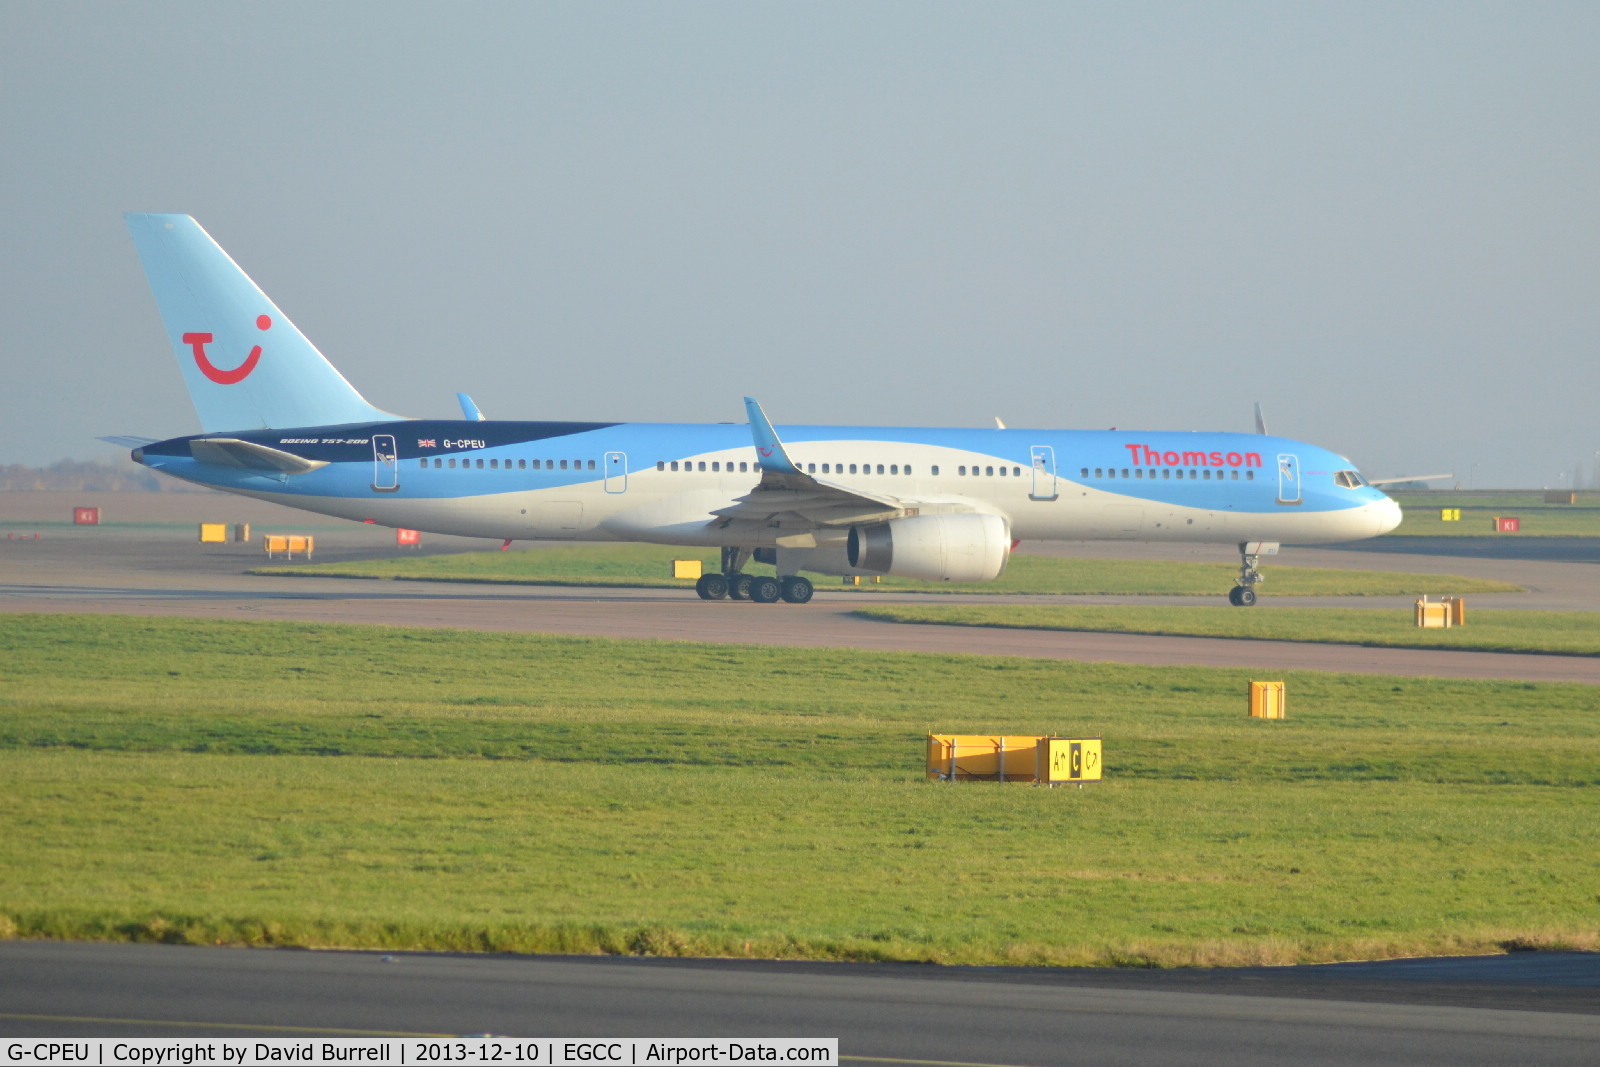 G-CPEU, 1999 Boeing 757-236 C/N 29941, Thomson G-CPEU Boeing 757-236 taxiing at Manchester Airport.